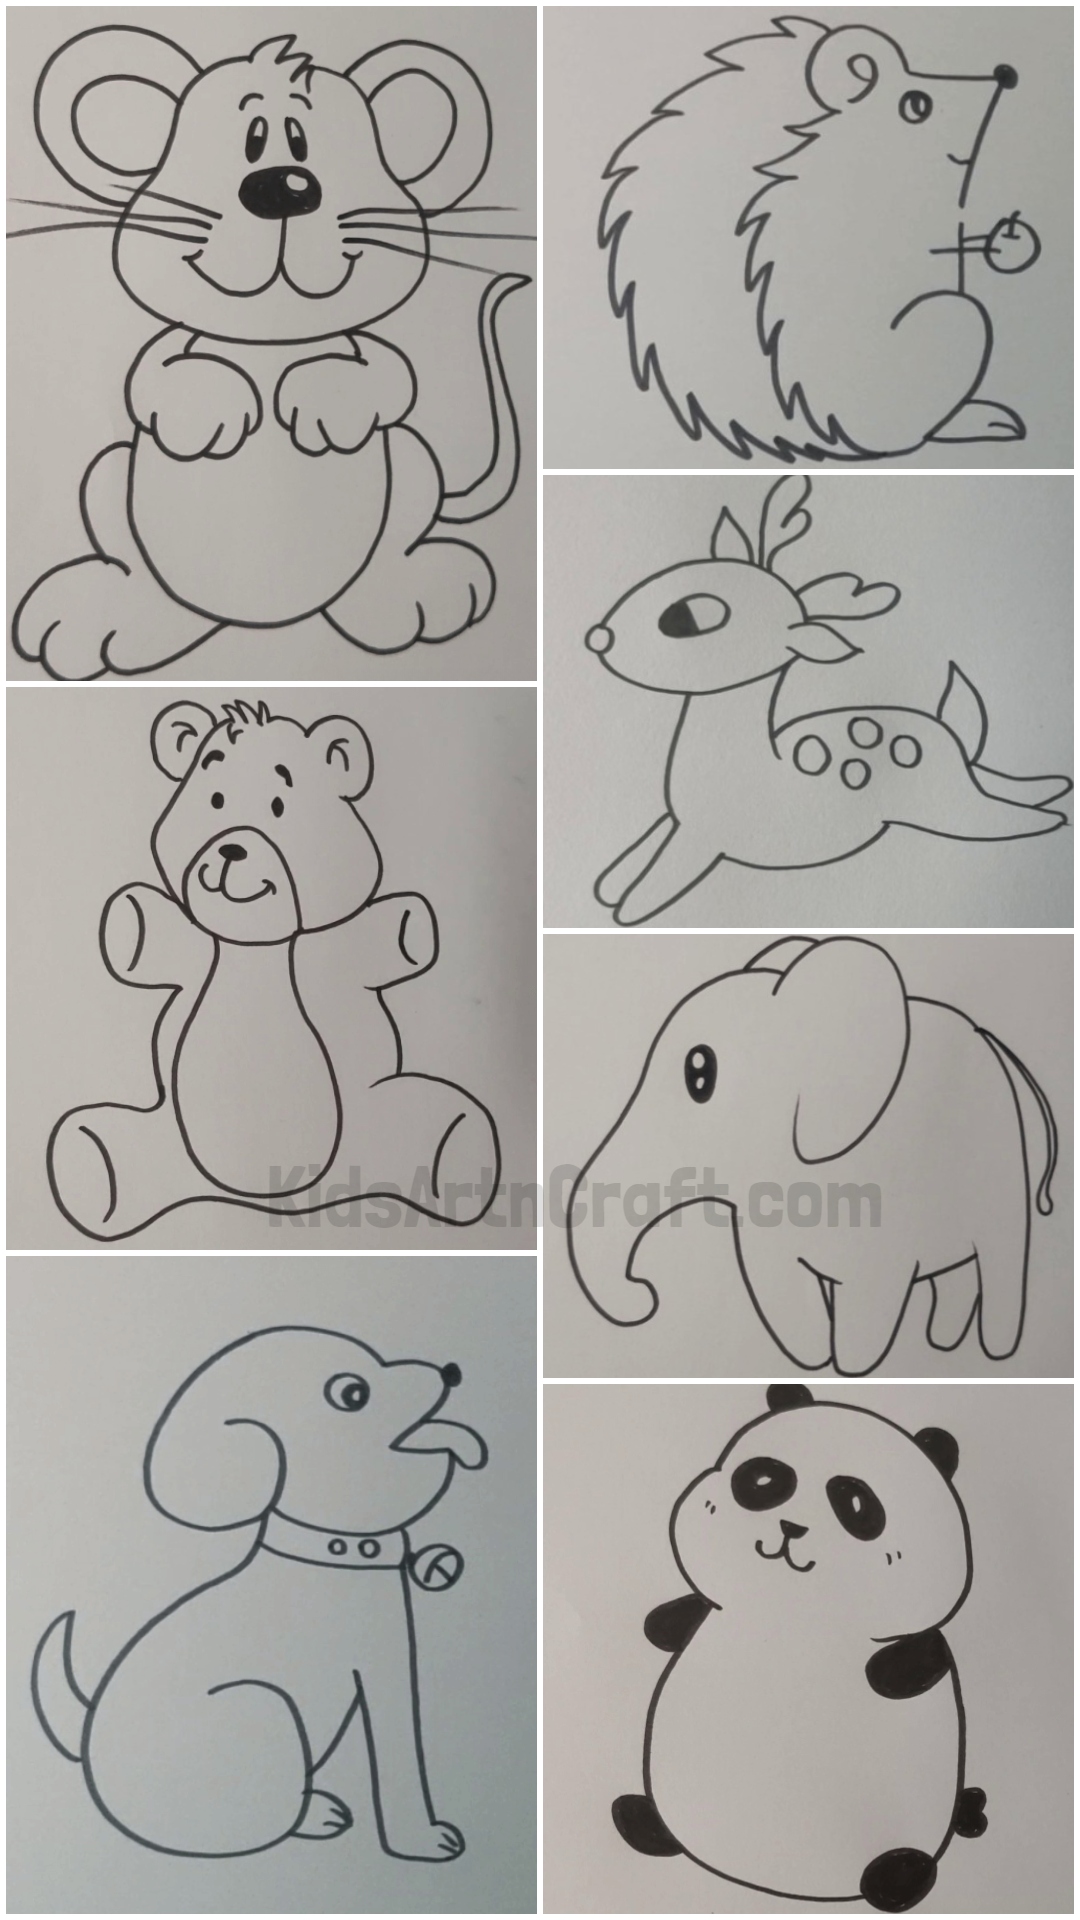 easy to draw cute animal drawings for kids project FS Kidsartncraft 16 4